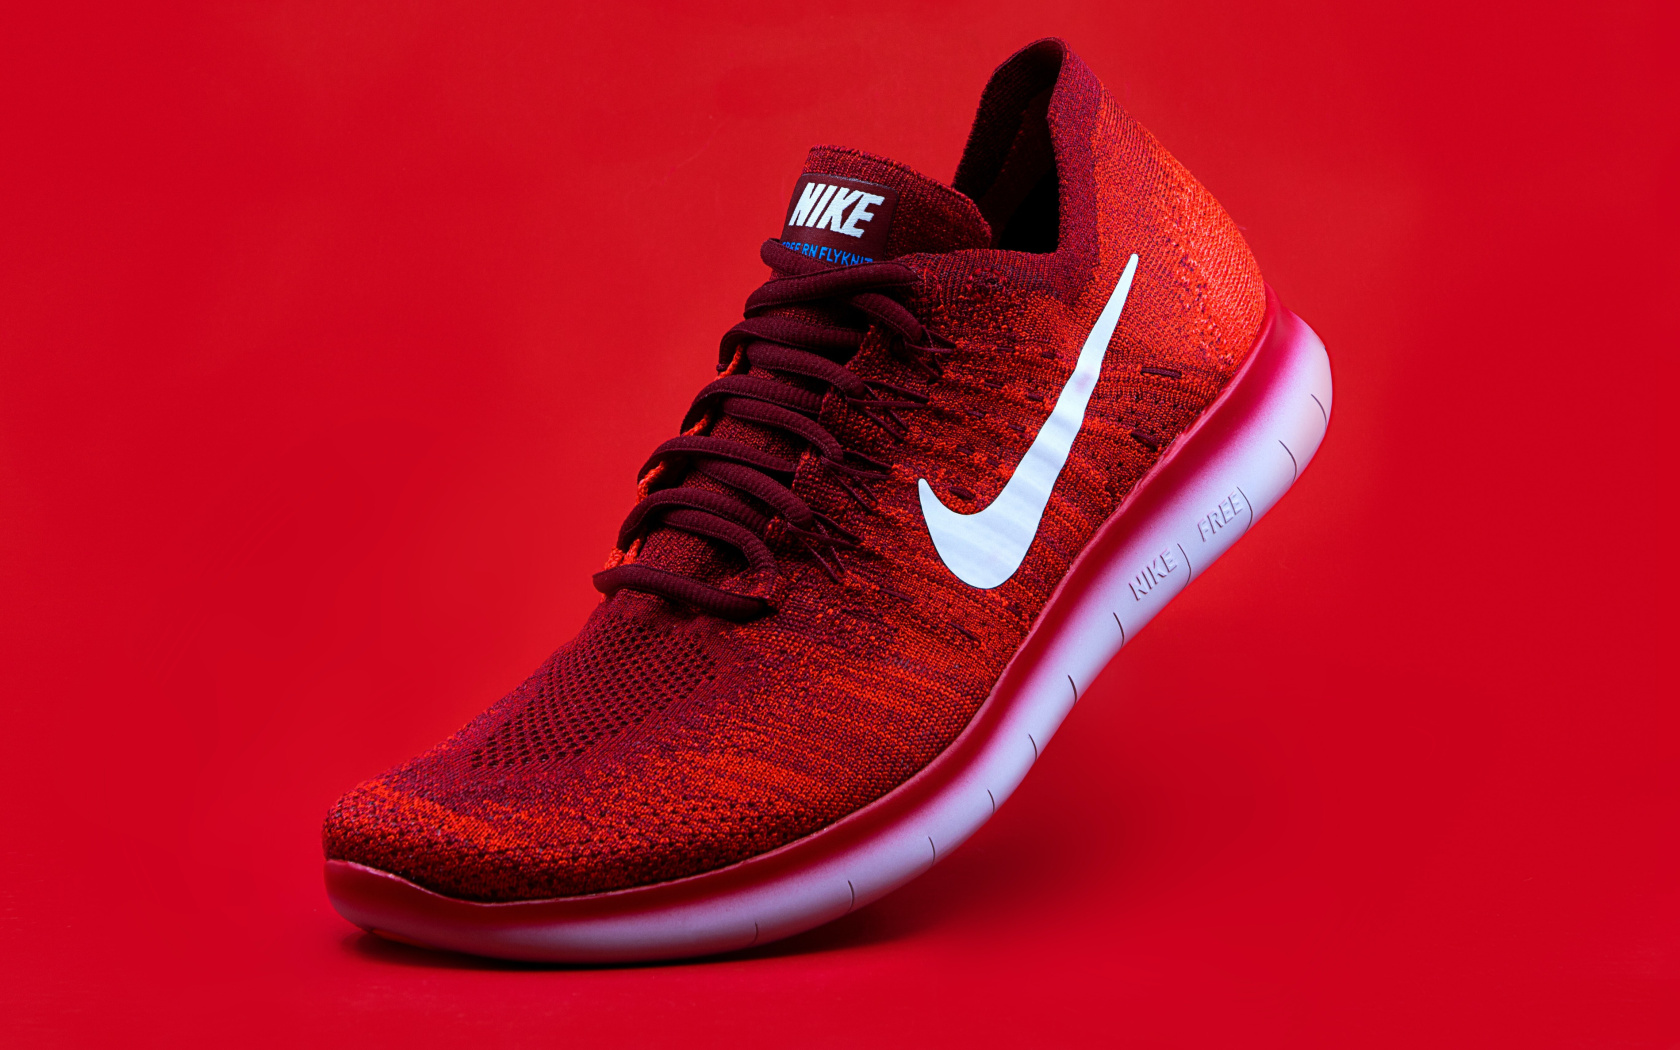 Red Nike Shoes wallpaper 1680x1050